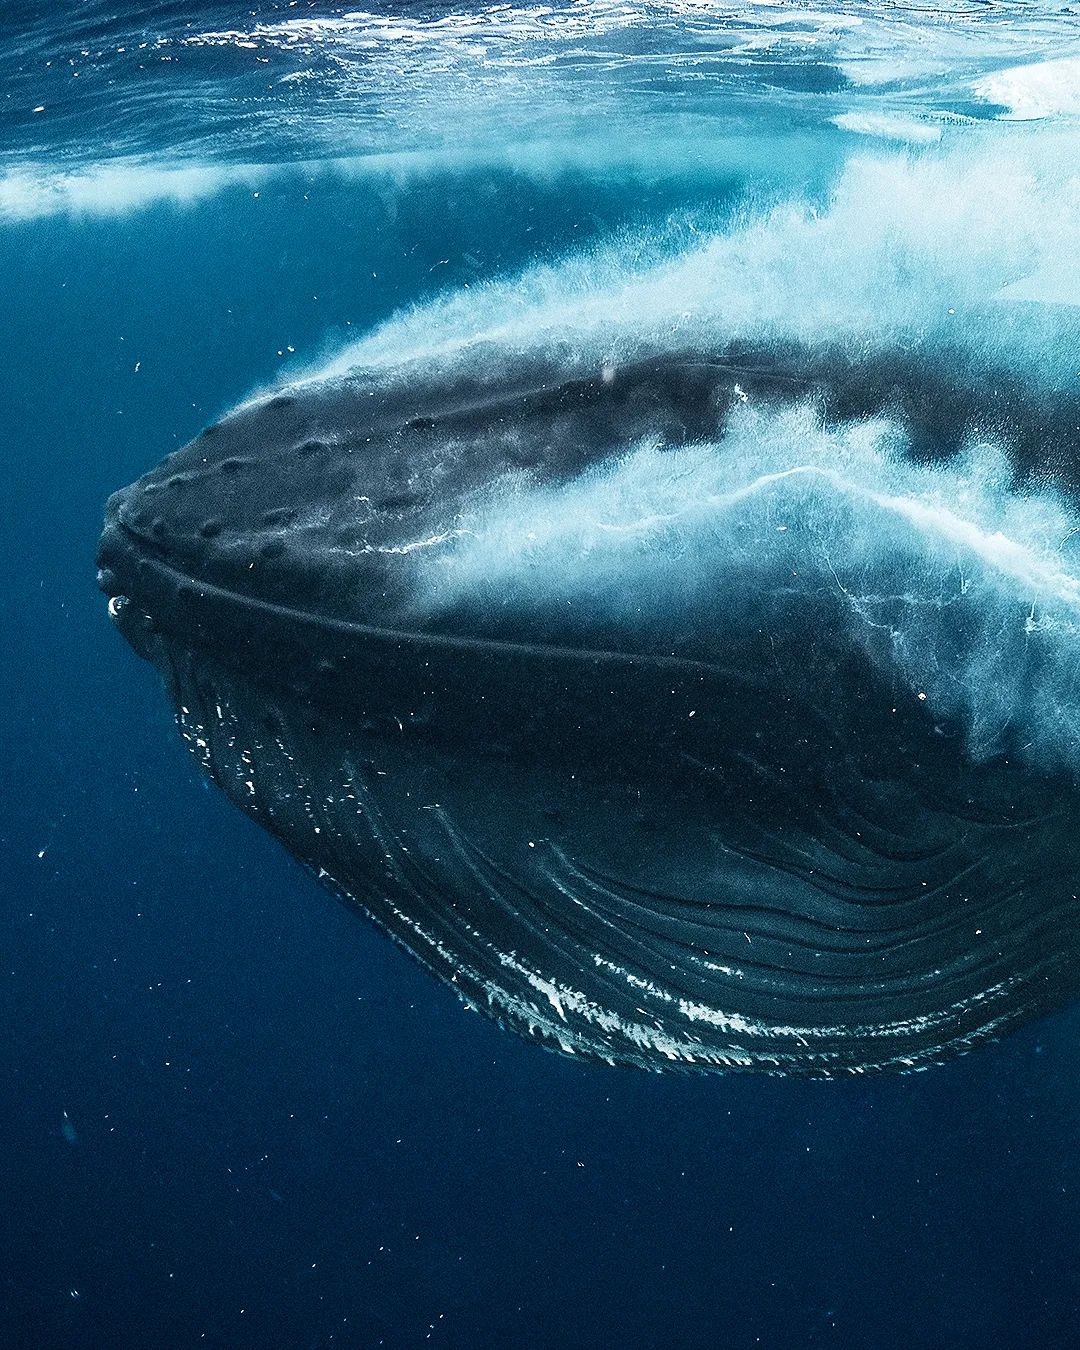 The Baleen Whale